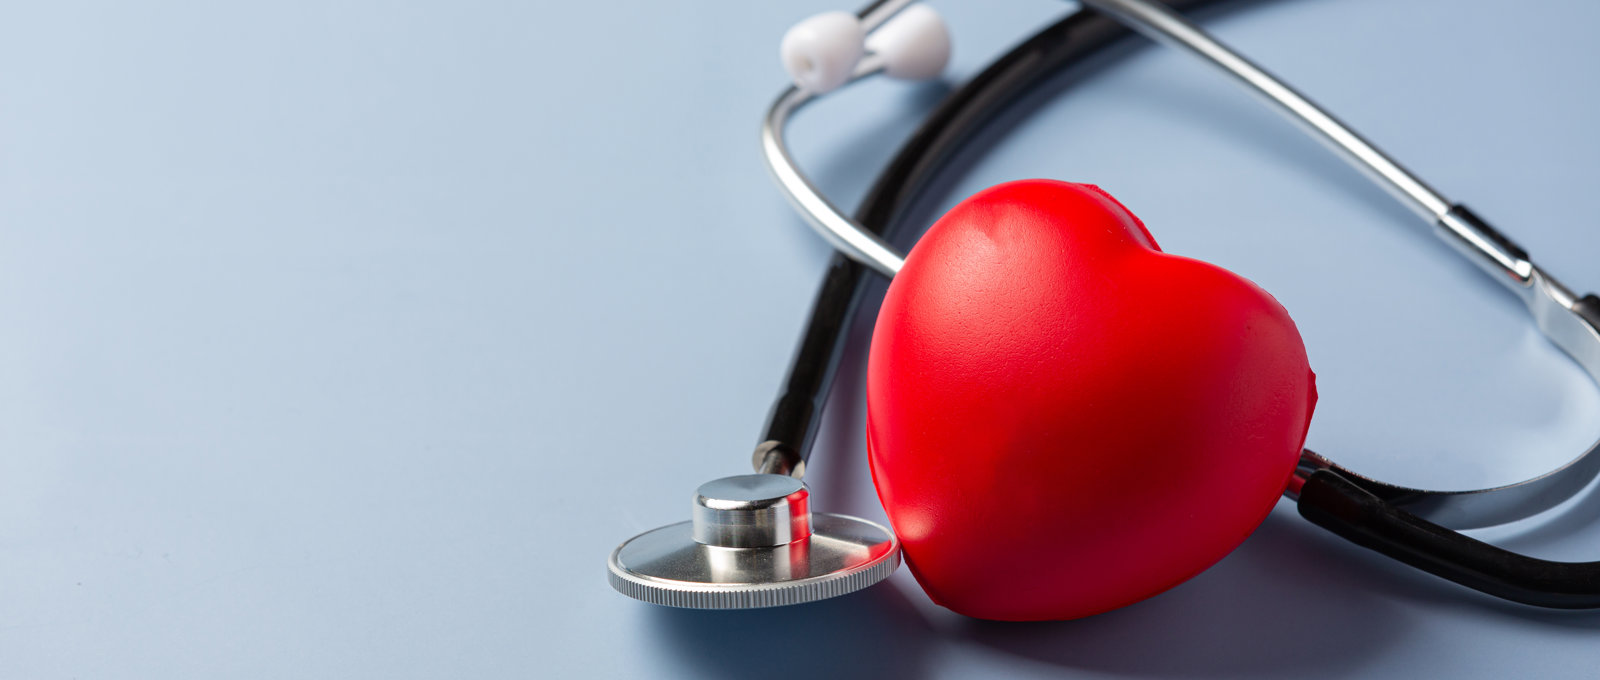 Stethoscope next to a red 3D love heart